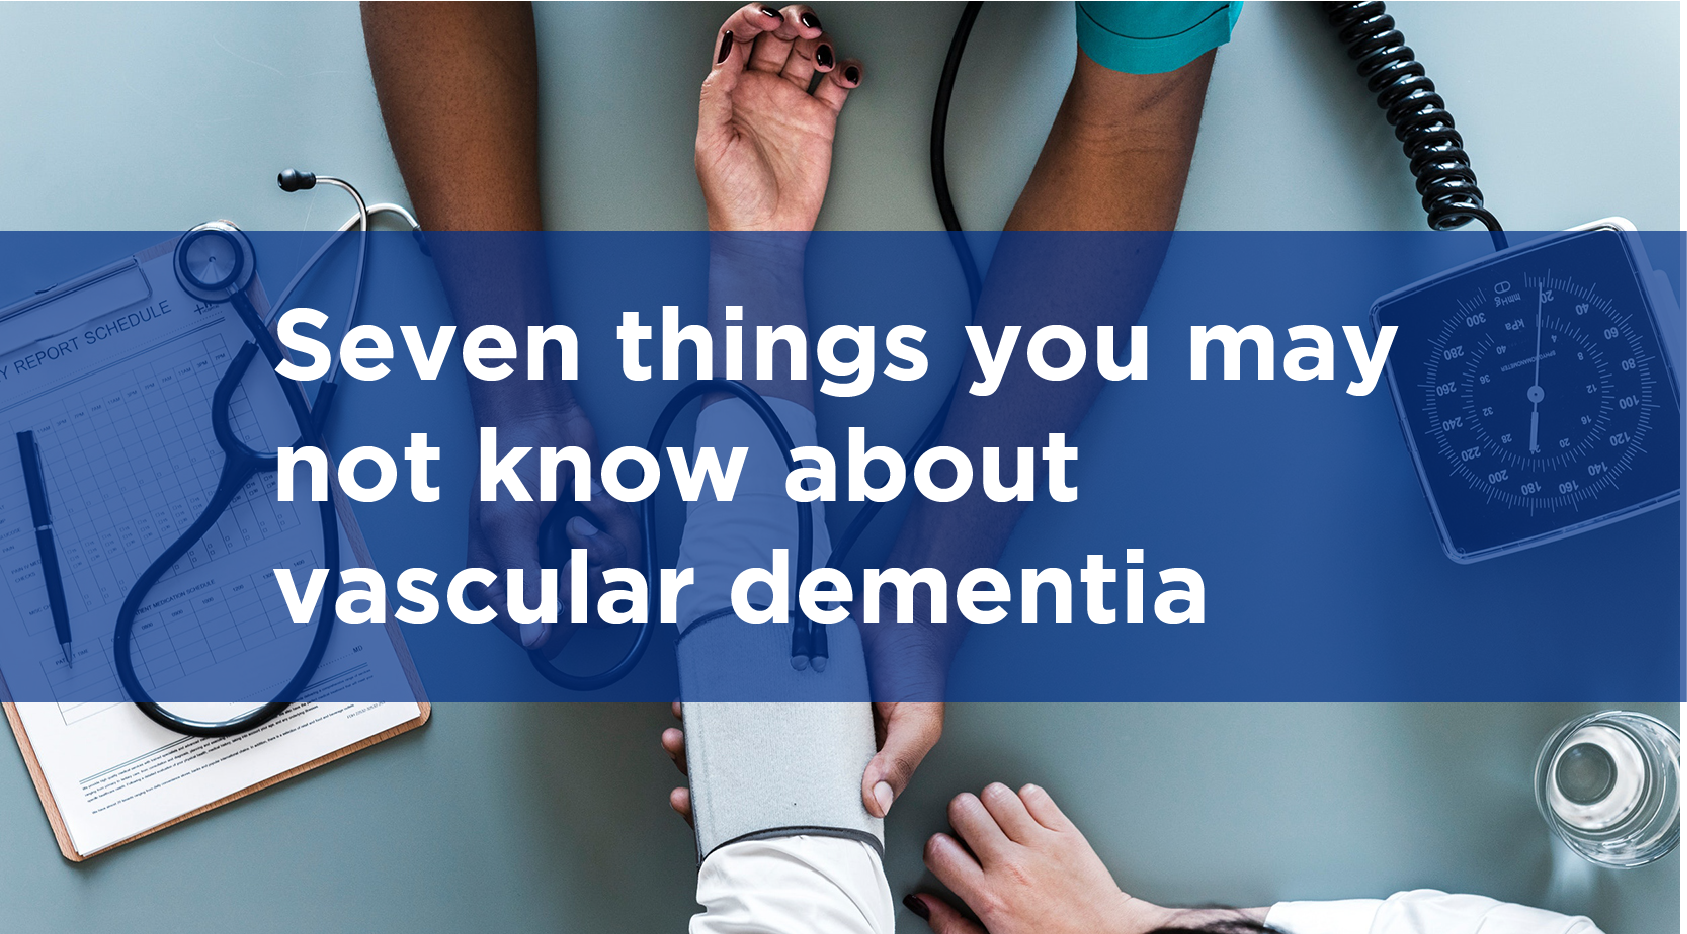 Seven things you may not know about vascular dementia